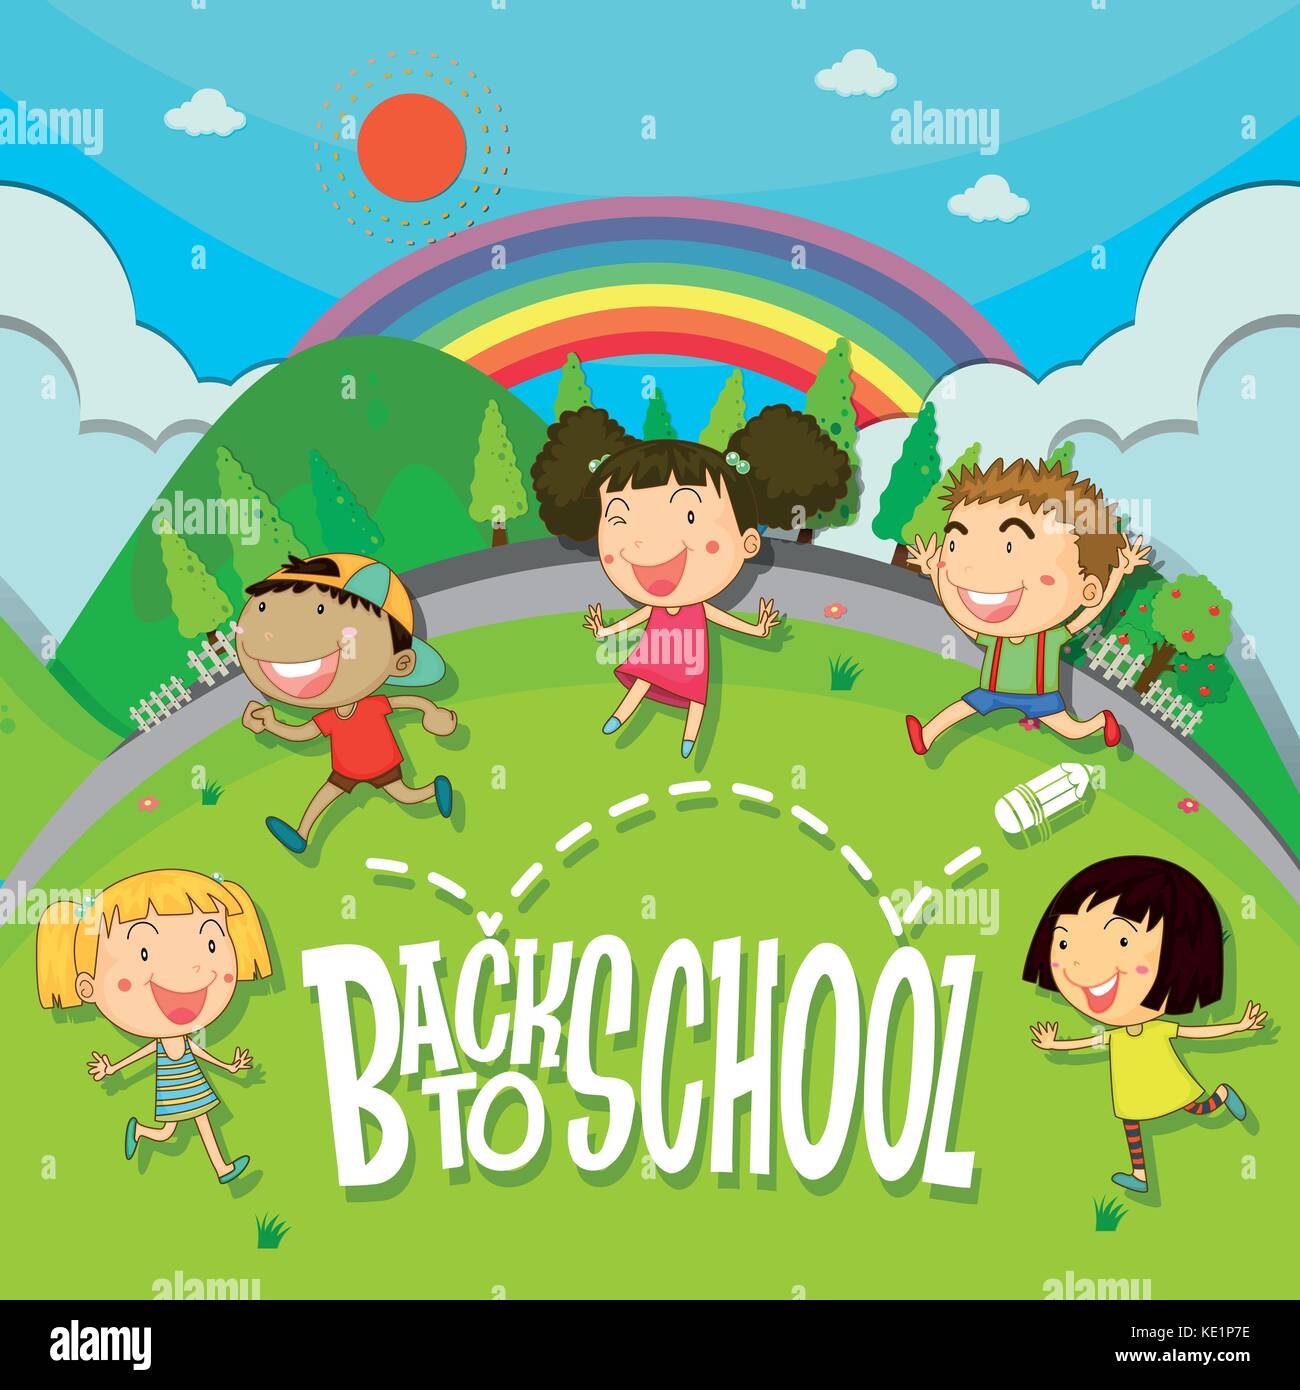 Back to school theme with children in the park illustration Stock Vector